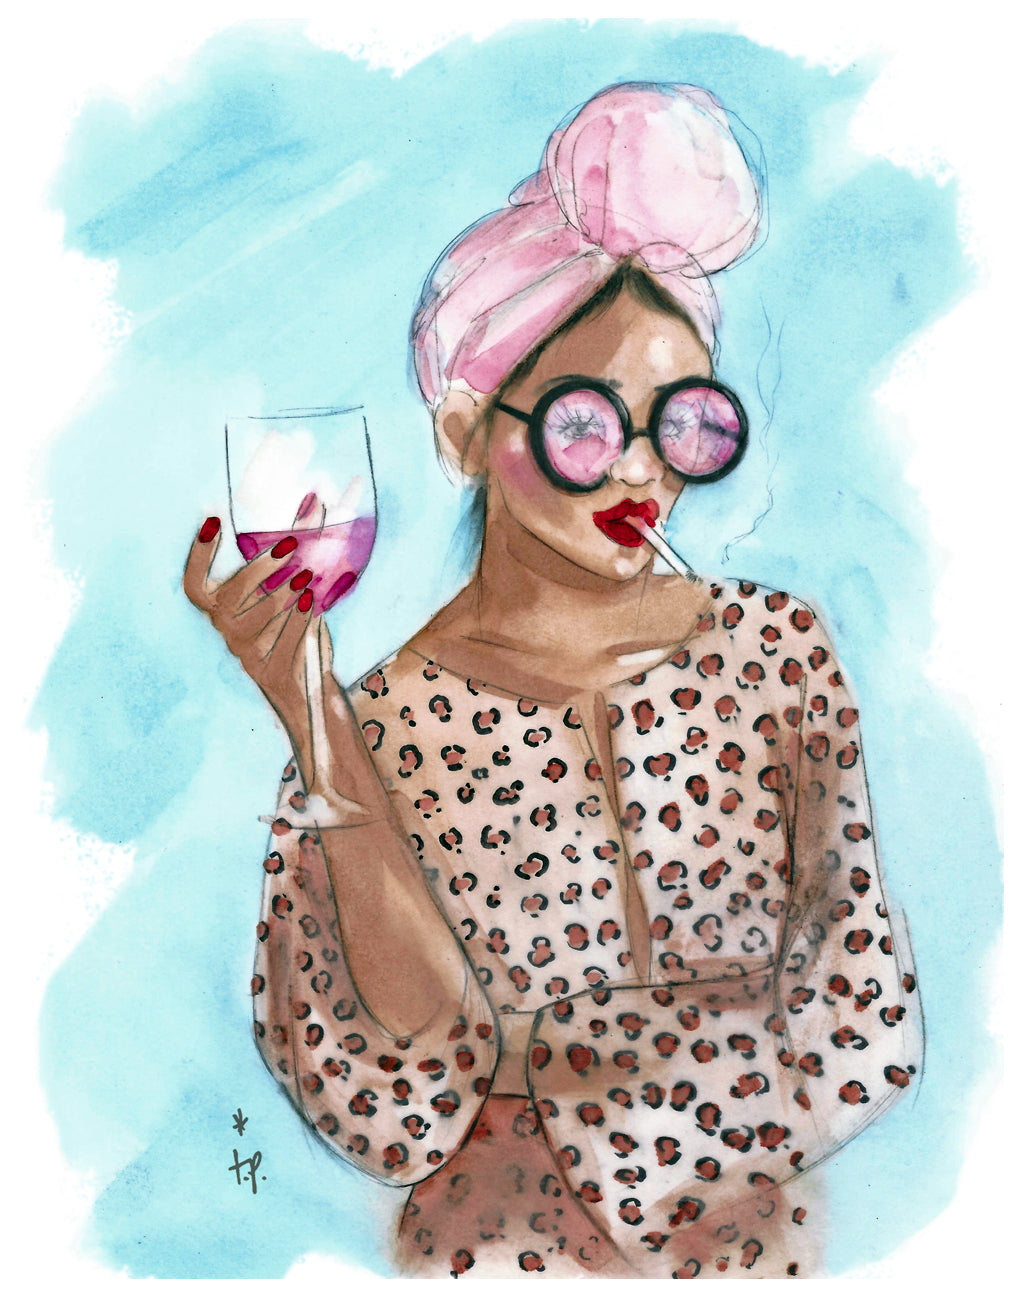 Print of a woman holding a glass of wine and wearing a headscarf by Tatiana Poblah